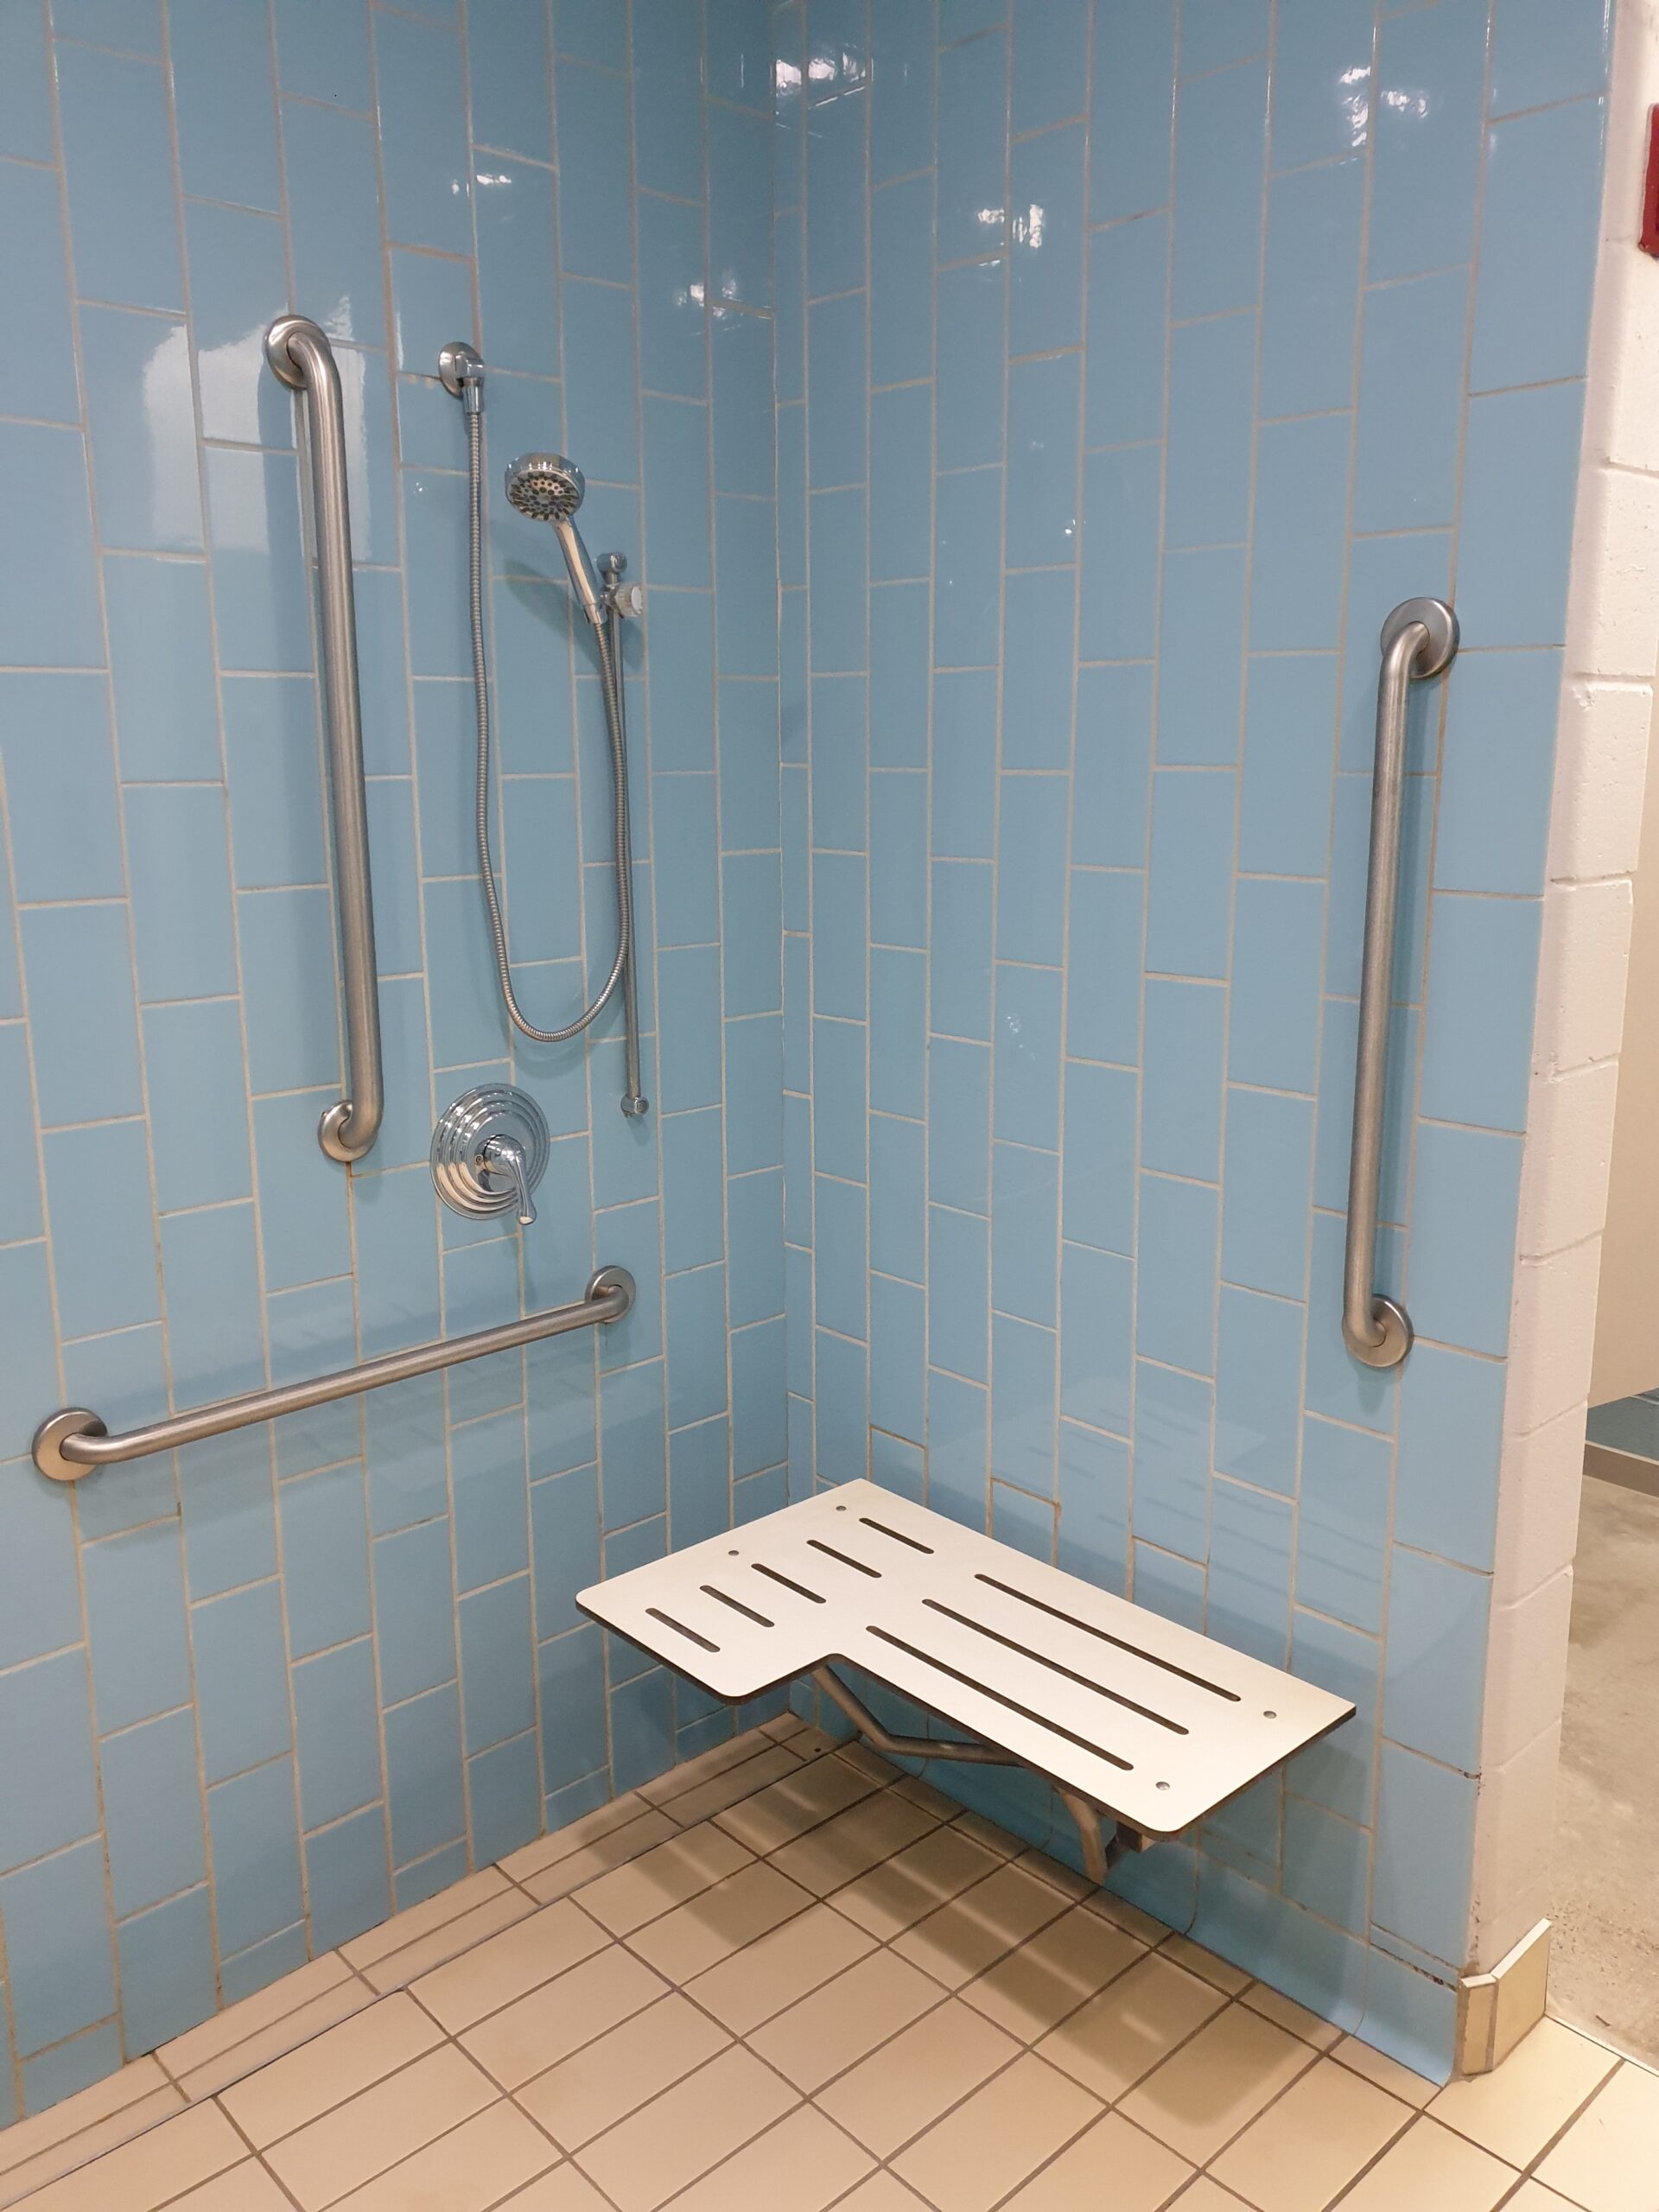 a shower in a YMCA changing room with accessibility equipment